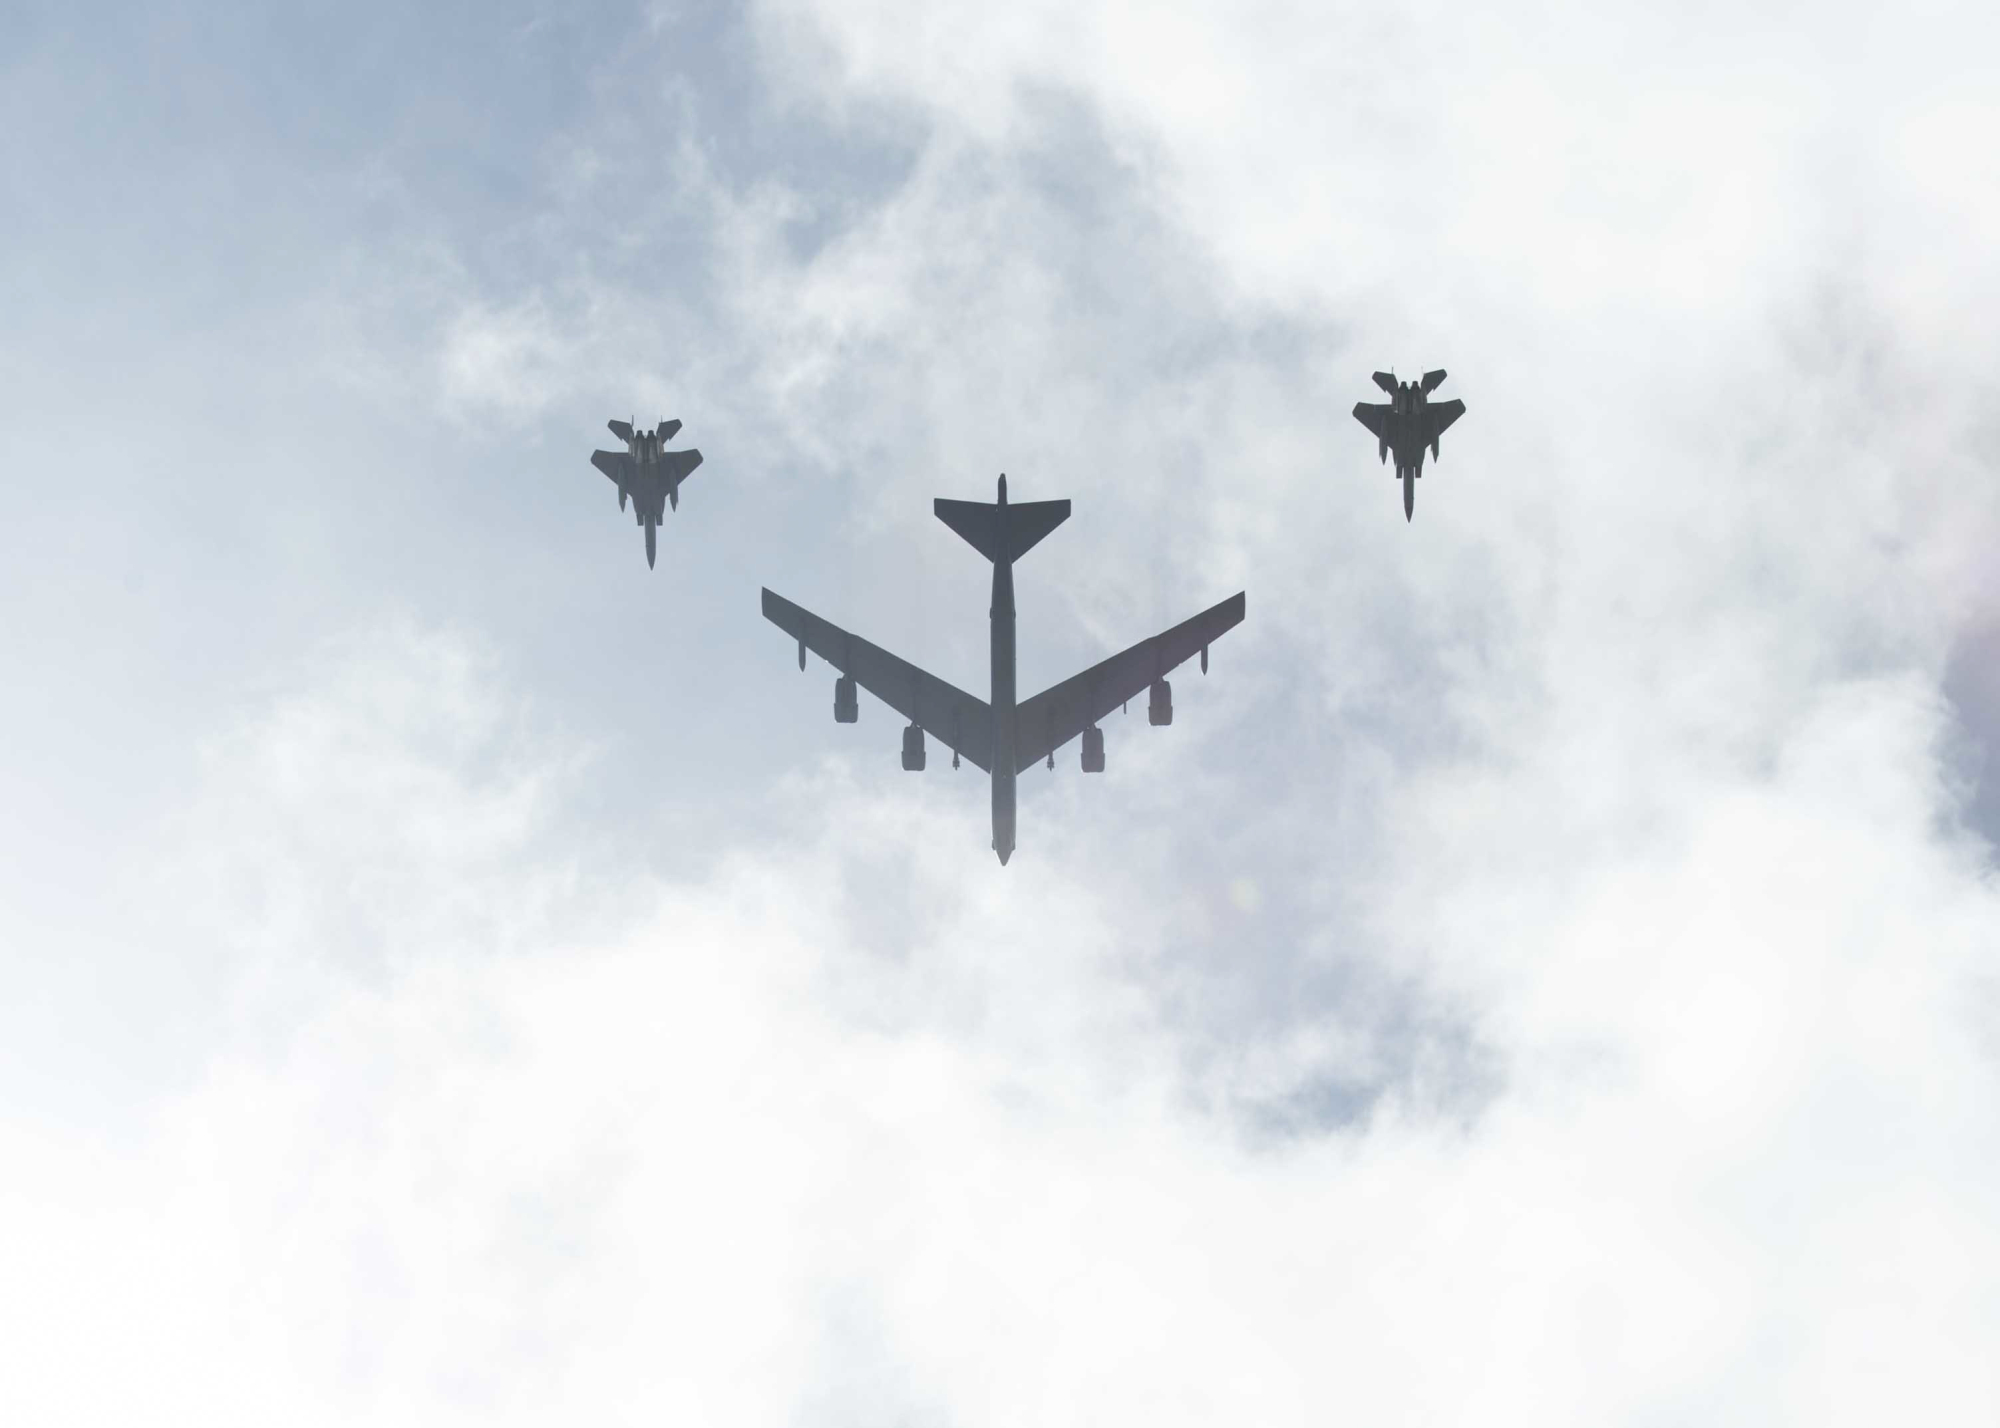 A B-52 bomber, escorted by F-15E Strike Eagle tactical ground attack aircraft, flies over the 75th Guam Liberation Day parade on July 21 in Hagatna, Guam. | U.S. NAVY